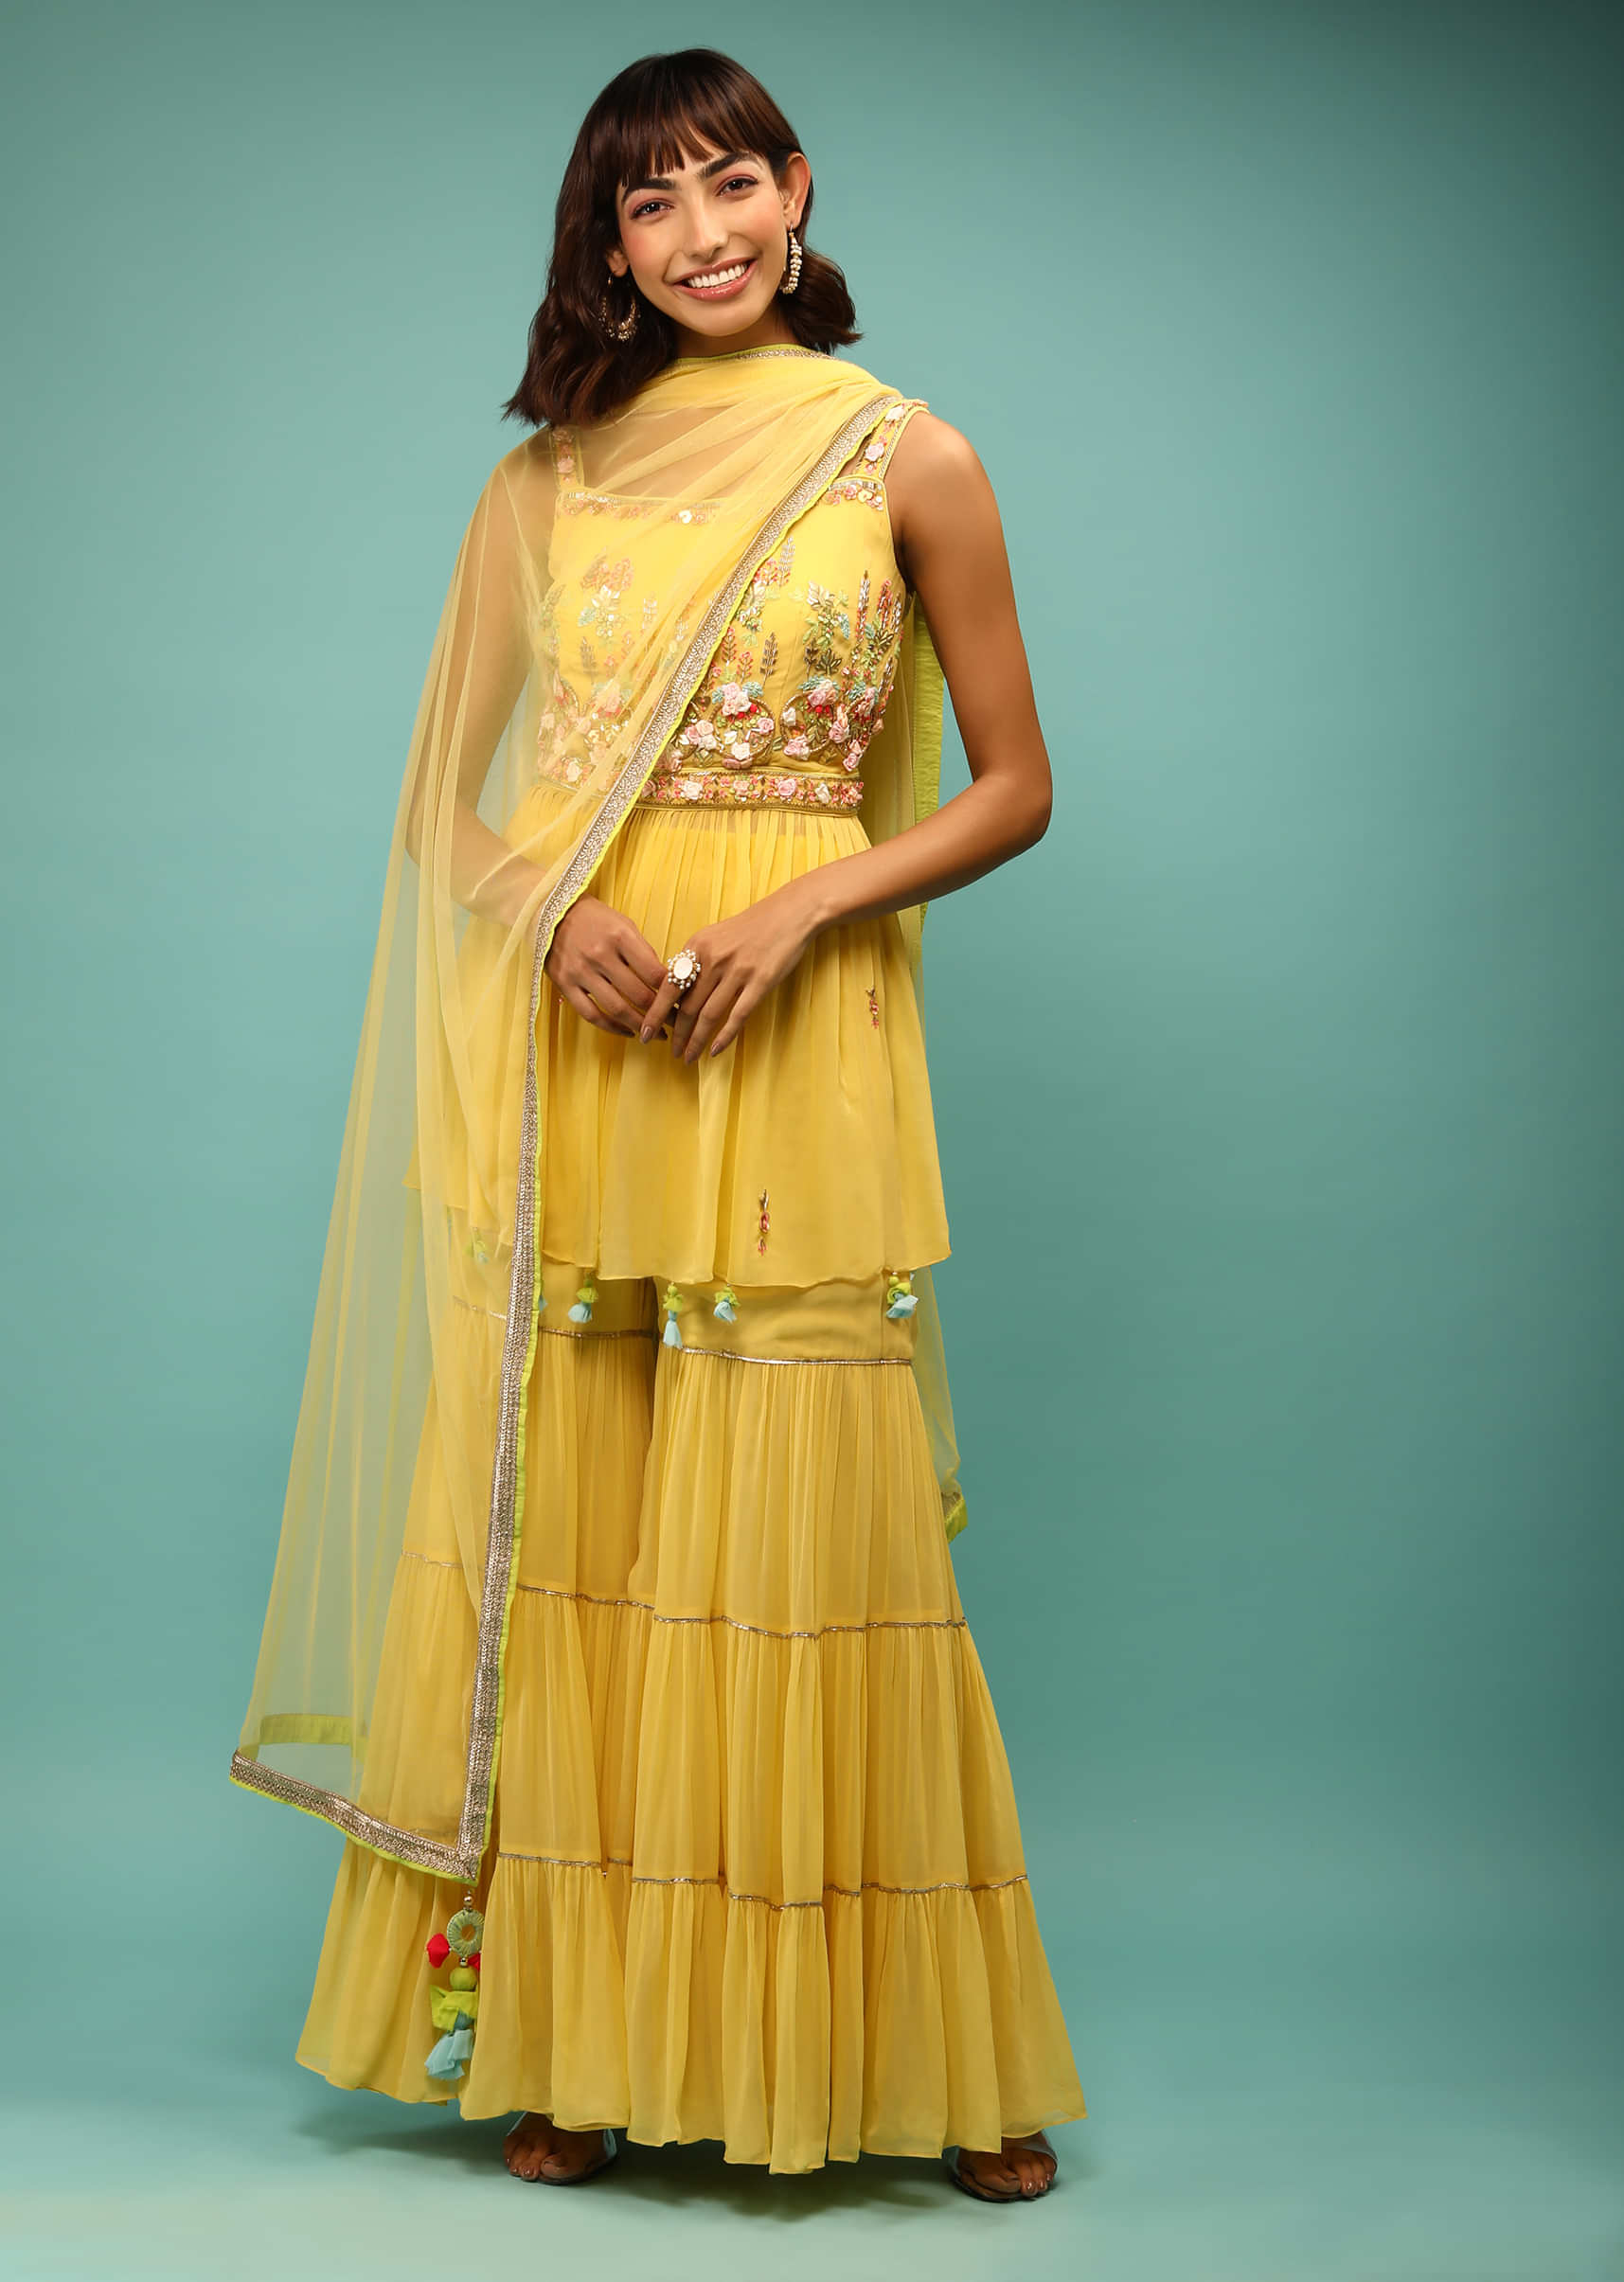 Daffodil Yellow Sharara And Peplum Suit With 3D Satin Flowers And Multi Colored Bead Work In Floral Motifs 